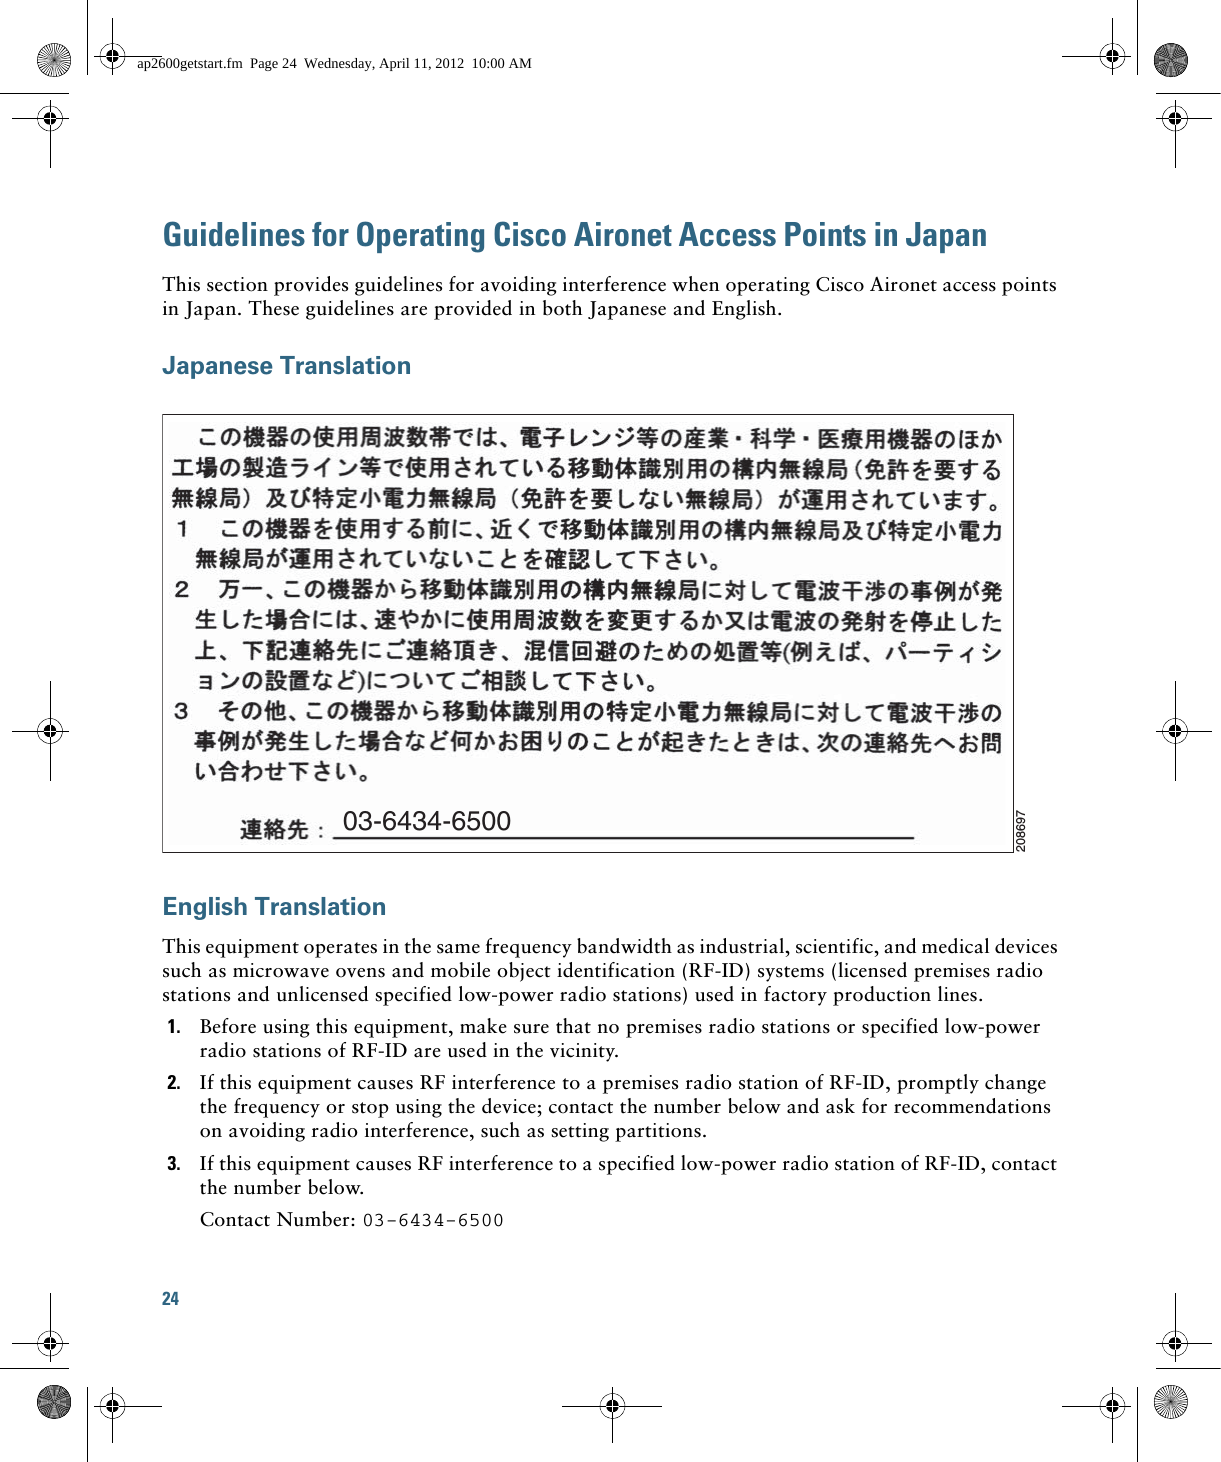 24 Guidelines for Operating Cisco Aironet Access Points in JapanThis section provides guidelines for avoiding interference when operating Cisco Aironet access points in Japan. These guidelines are provided in both Japanese and English.Japanese TranslationEnglish TranslationThis equipment operates in the same frequency bandwidth as industrial, scientific, and medical devices such as microwave ovens and mobile object identification (RF-ID) systems (licensed premises radio stations and unlicensed specified low-power radio stations) used in factory production lines.1. Before using this equipment, make sure that no premises radio stations or specified low-power radio stations of RF-ID are used in the vicinity.2. If this equipment causes RF interference to a premises radio station of RF-ID, promptly change the frequency or stop using the device; contact the number below and ask for recommendations on avoiding radio interference, such as setting partitions.3. If this equipment causes RF interference to a specified low-power radio station of RF-ID, contact the number below.Contact Number: 03-6434-650003-6434-6500208697ap2600getstart.fm  Page 24  Wednesday, April 11, 2012  10:00 AM